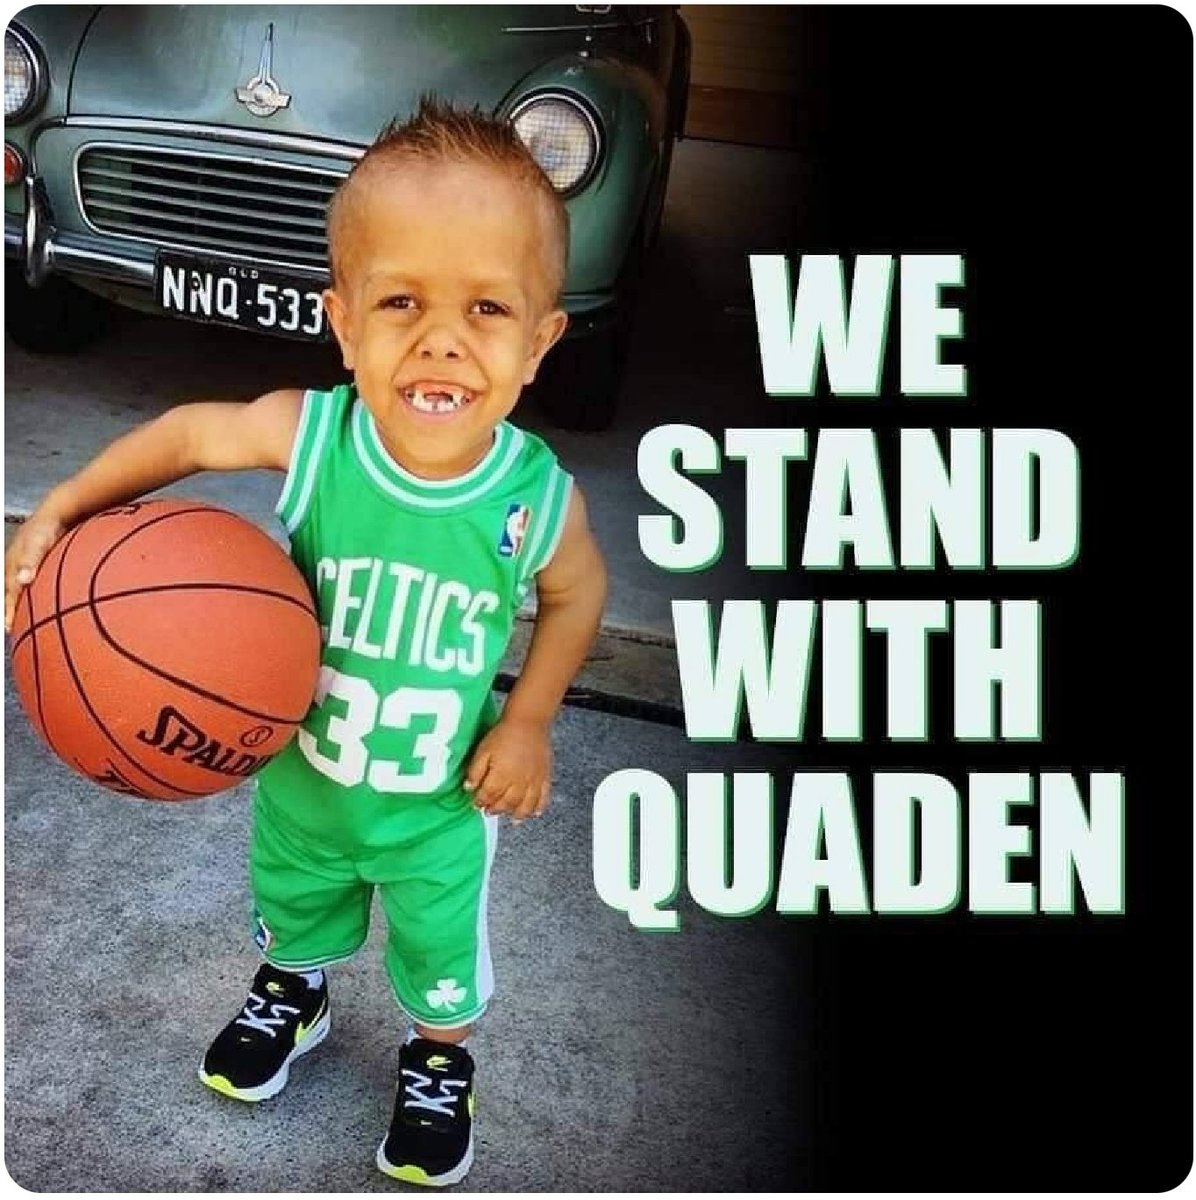 Buddy being different is just for brave people, like you and me. #WestandwithQuaden